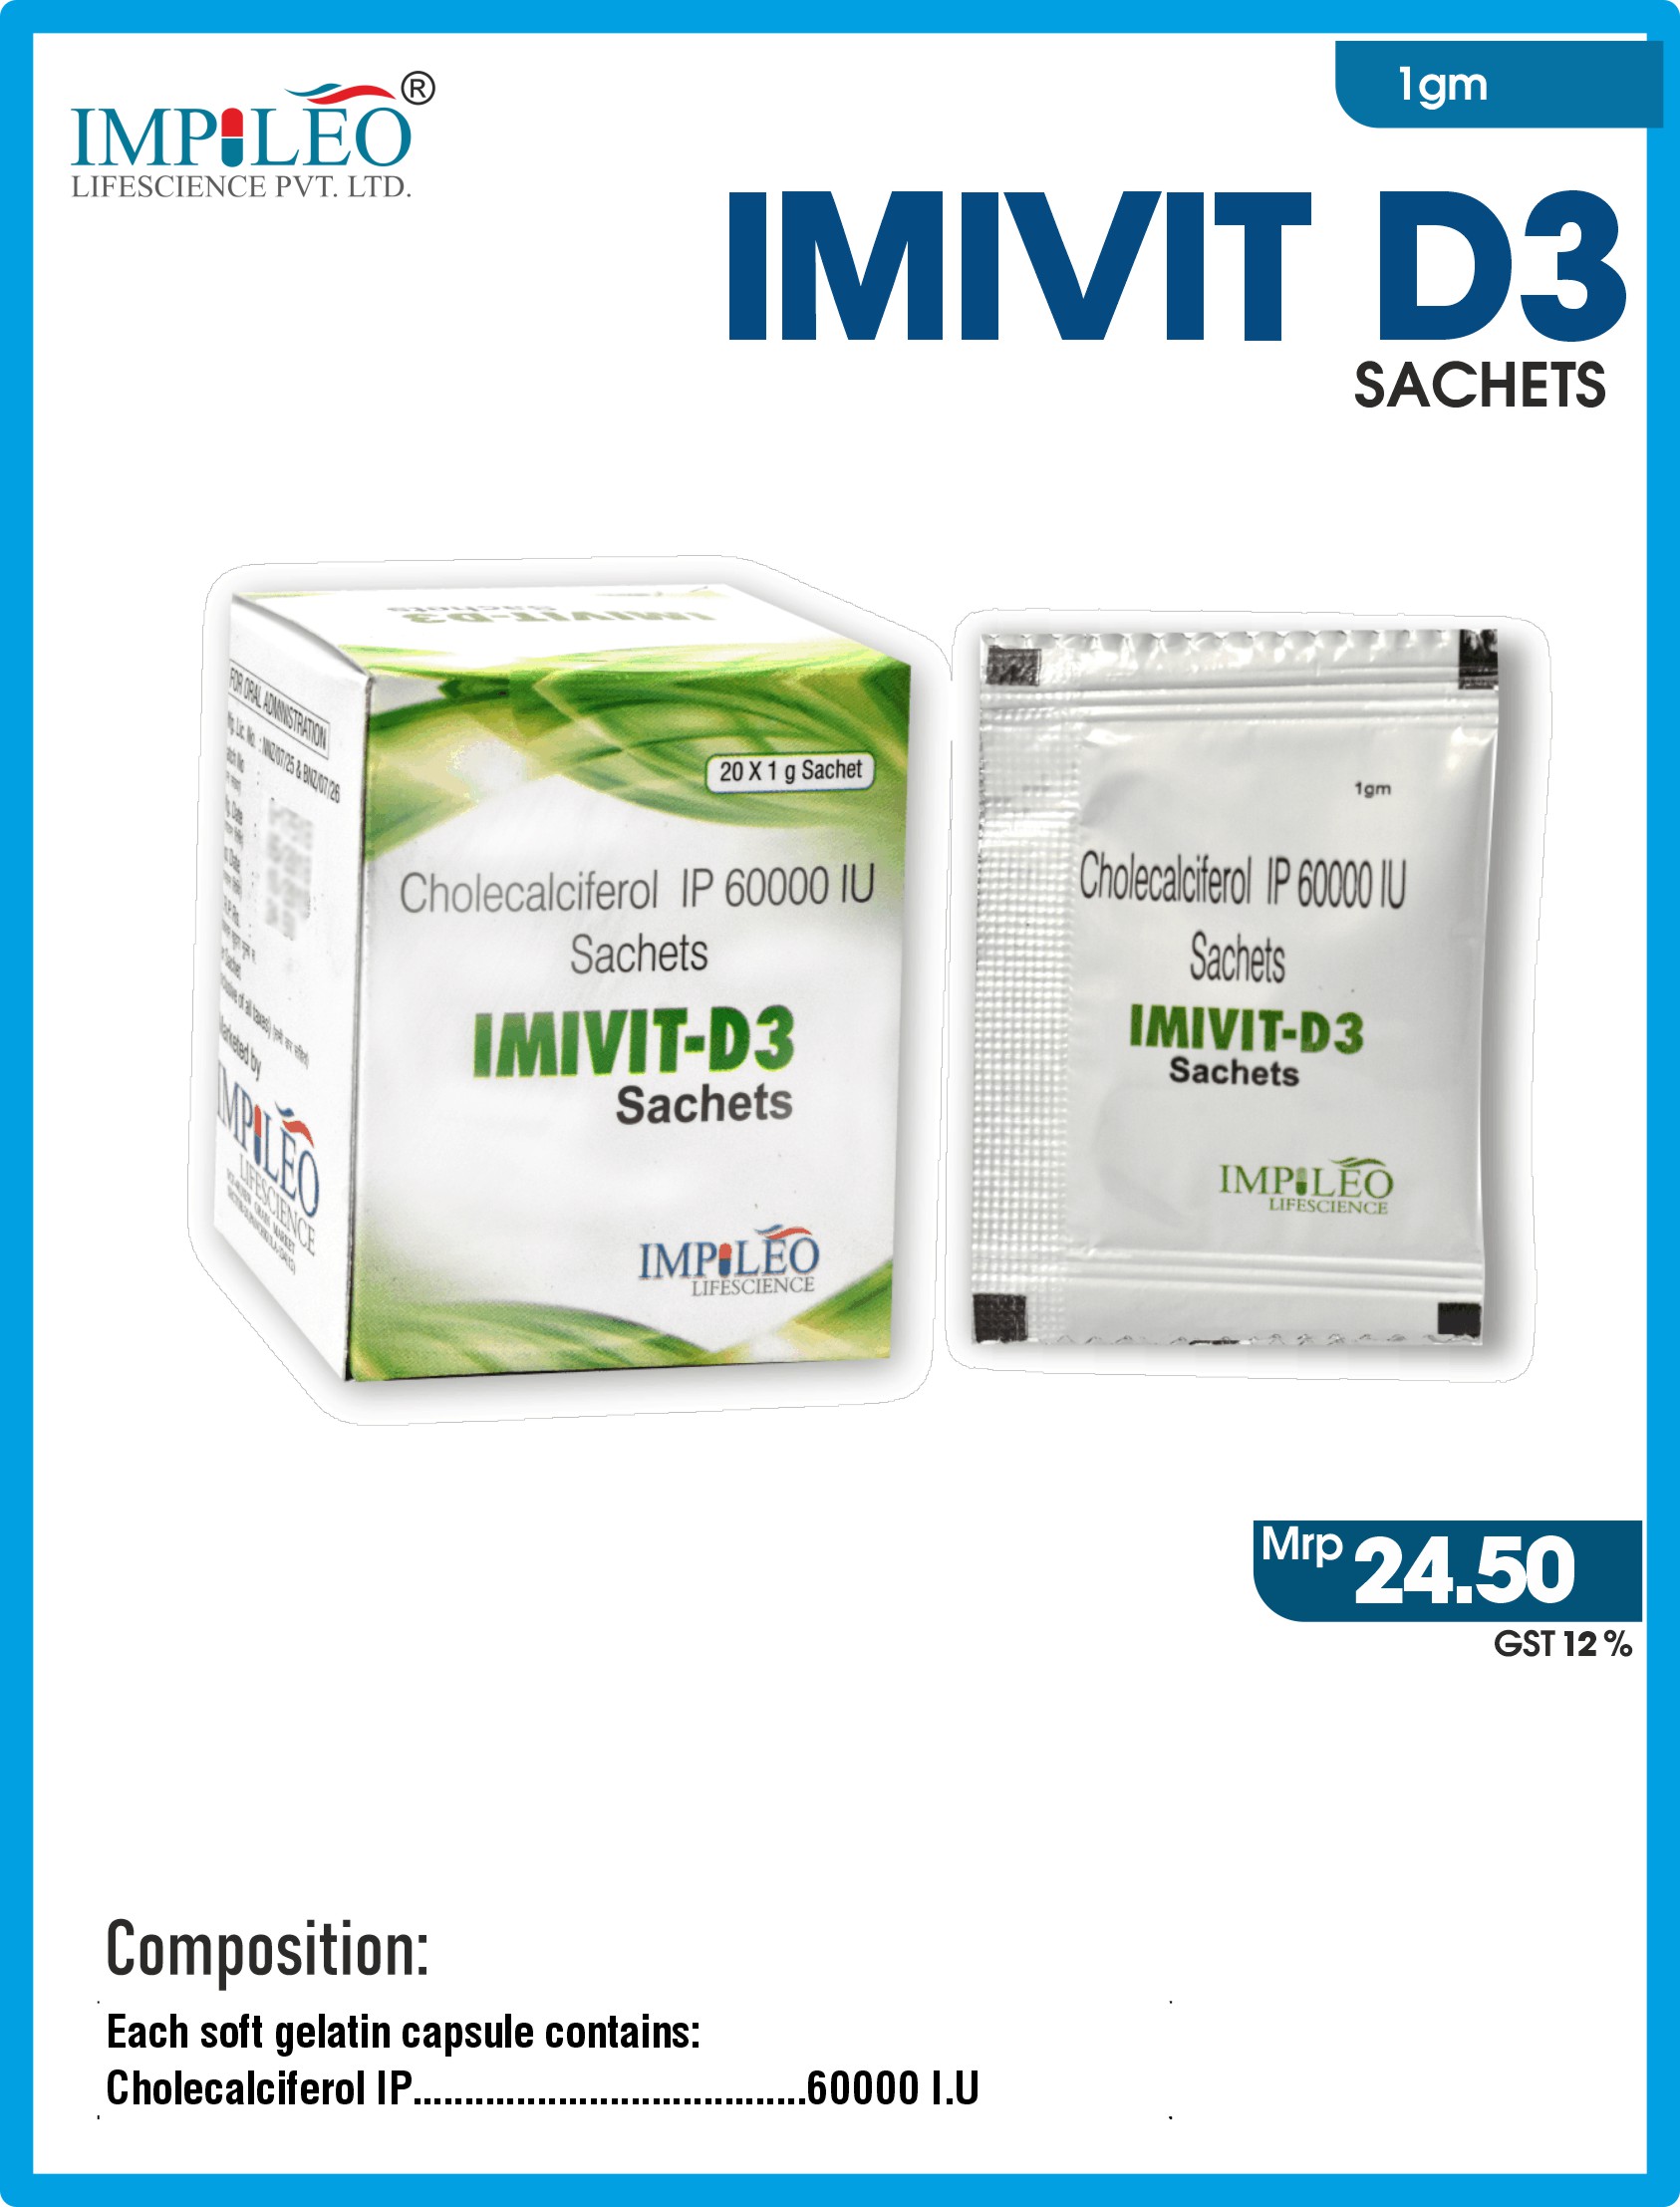 Experience Sunnier Days with IMIVIT D3 SACHET : PCD Pharma Franchise in Chandigarh